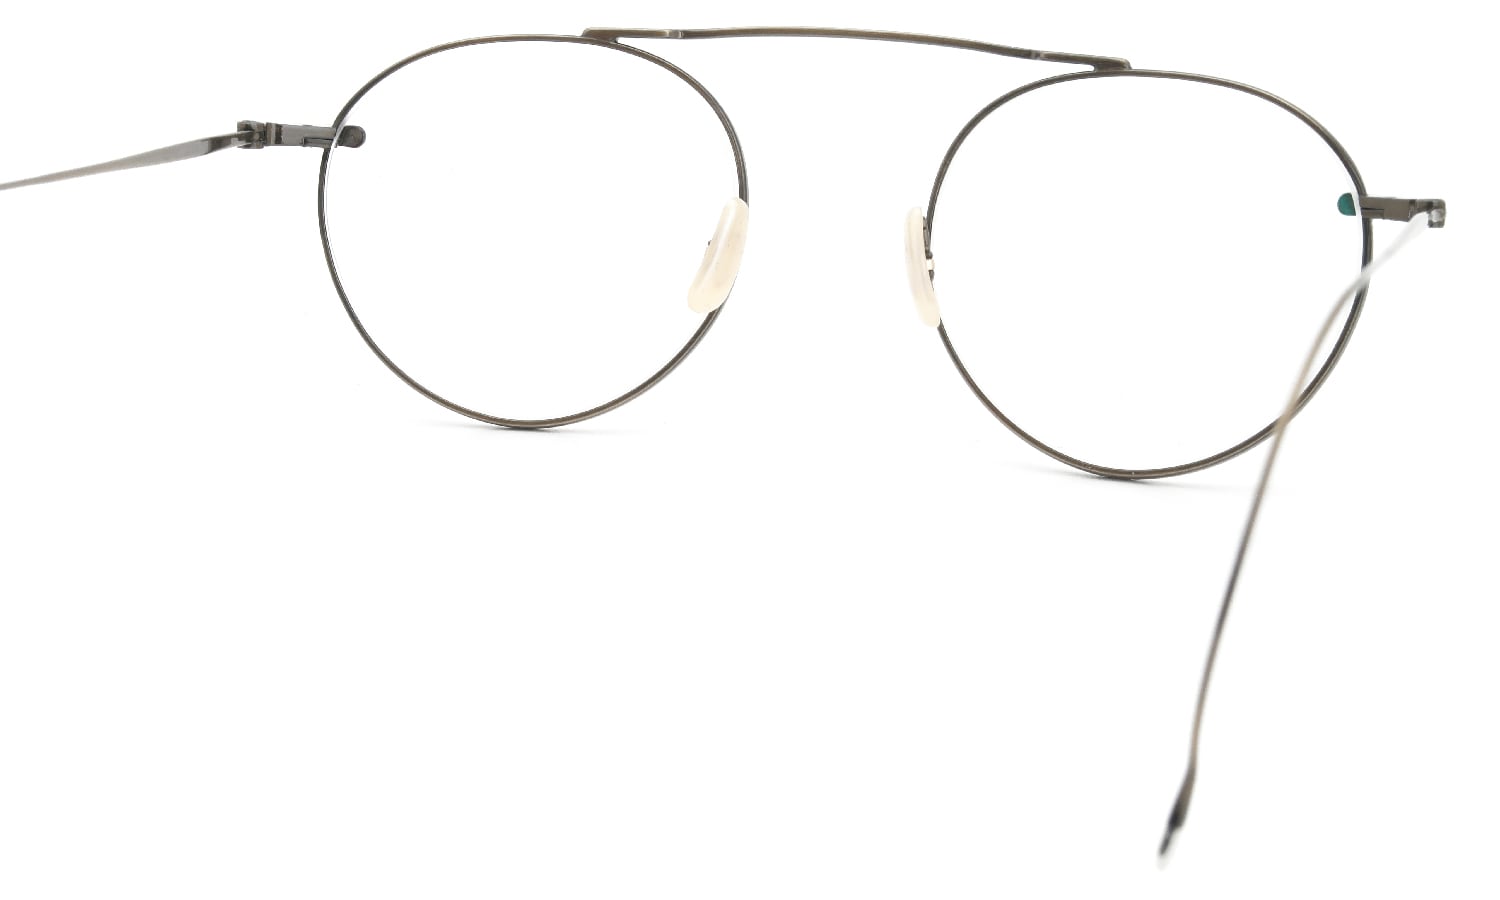 Mr.Leight REI C ANTIQUE-GOLD 48size